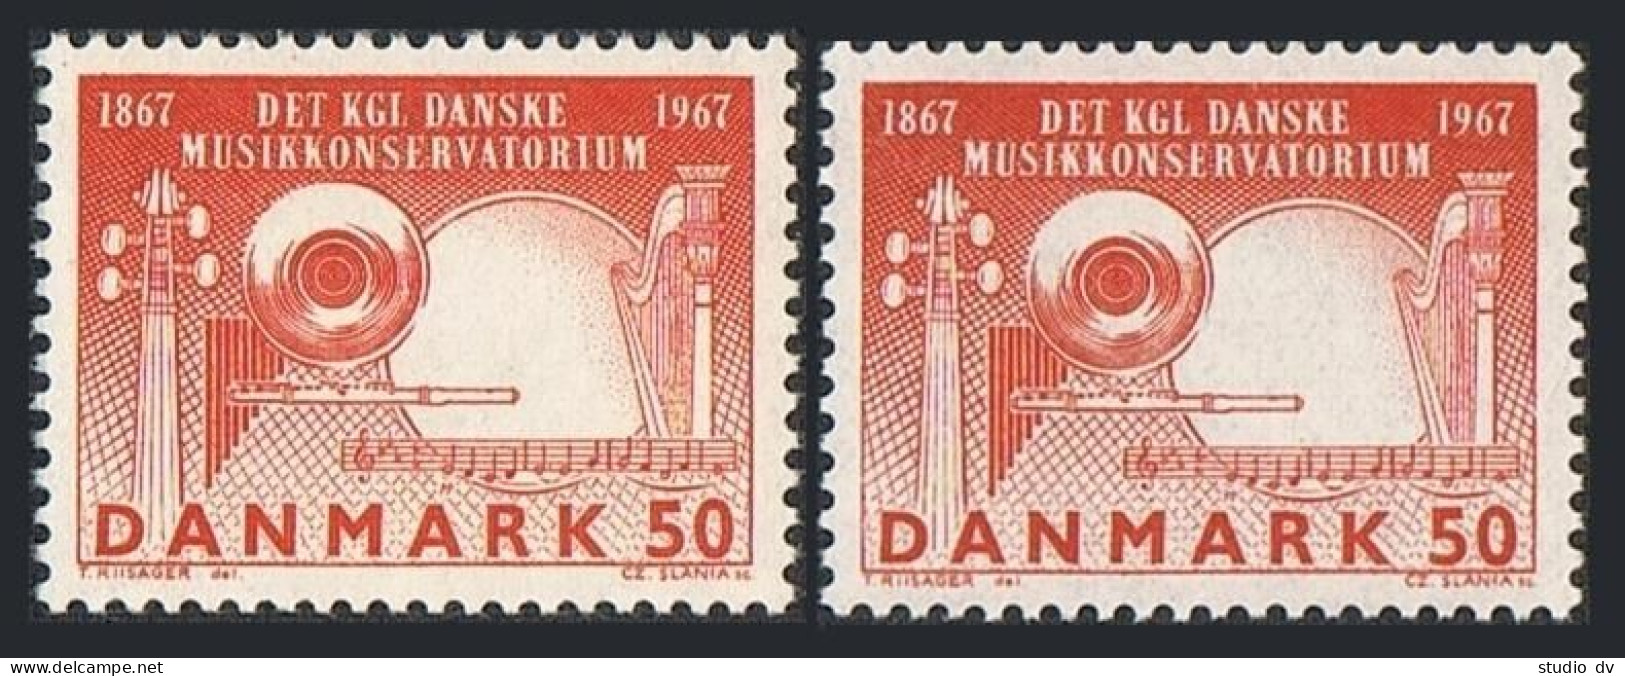 Denmark 430 Two Var, MNH. Michel 449x-449y. Royal Danish Academy Of Music, 1967. - Unused Stamps